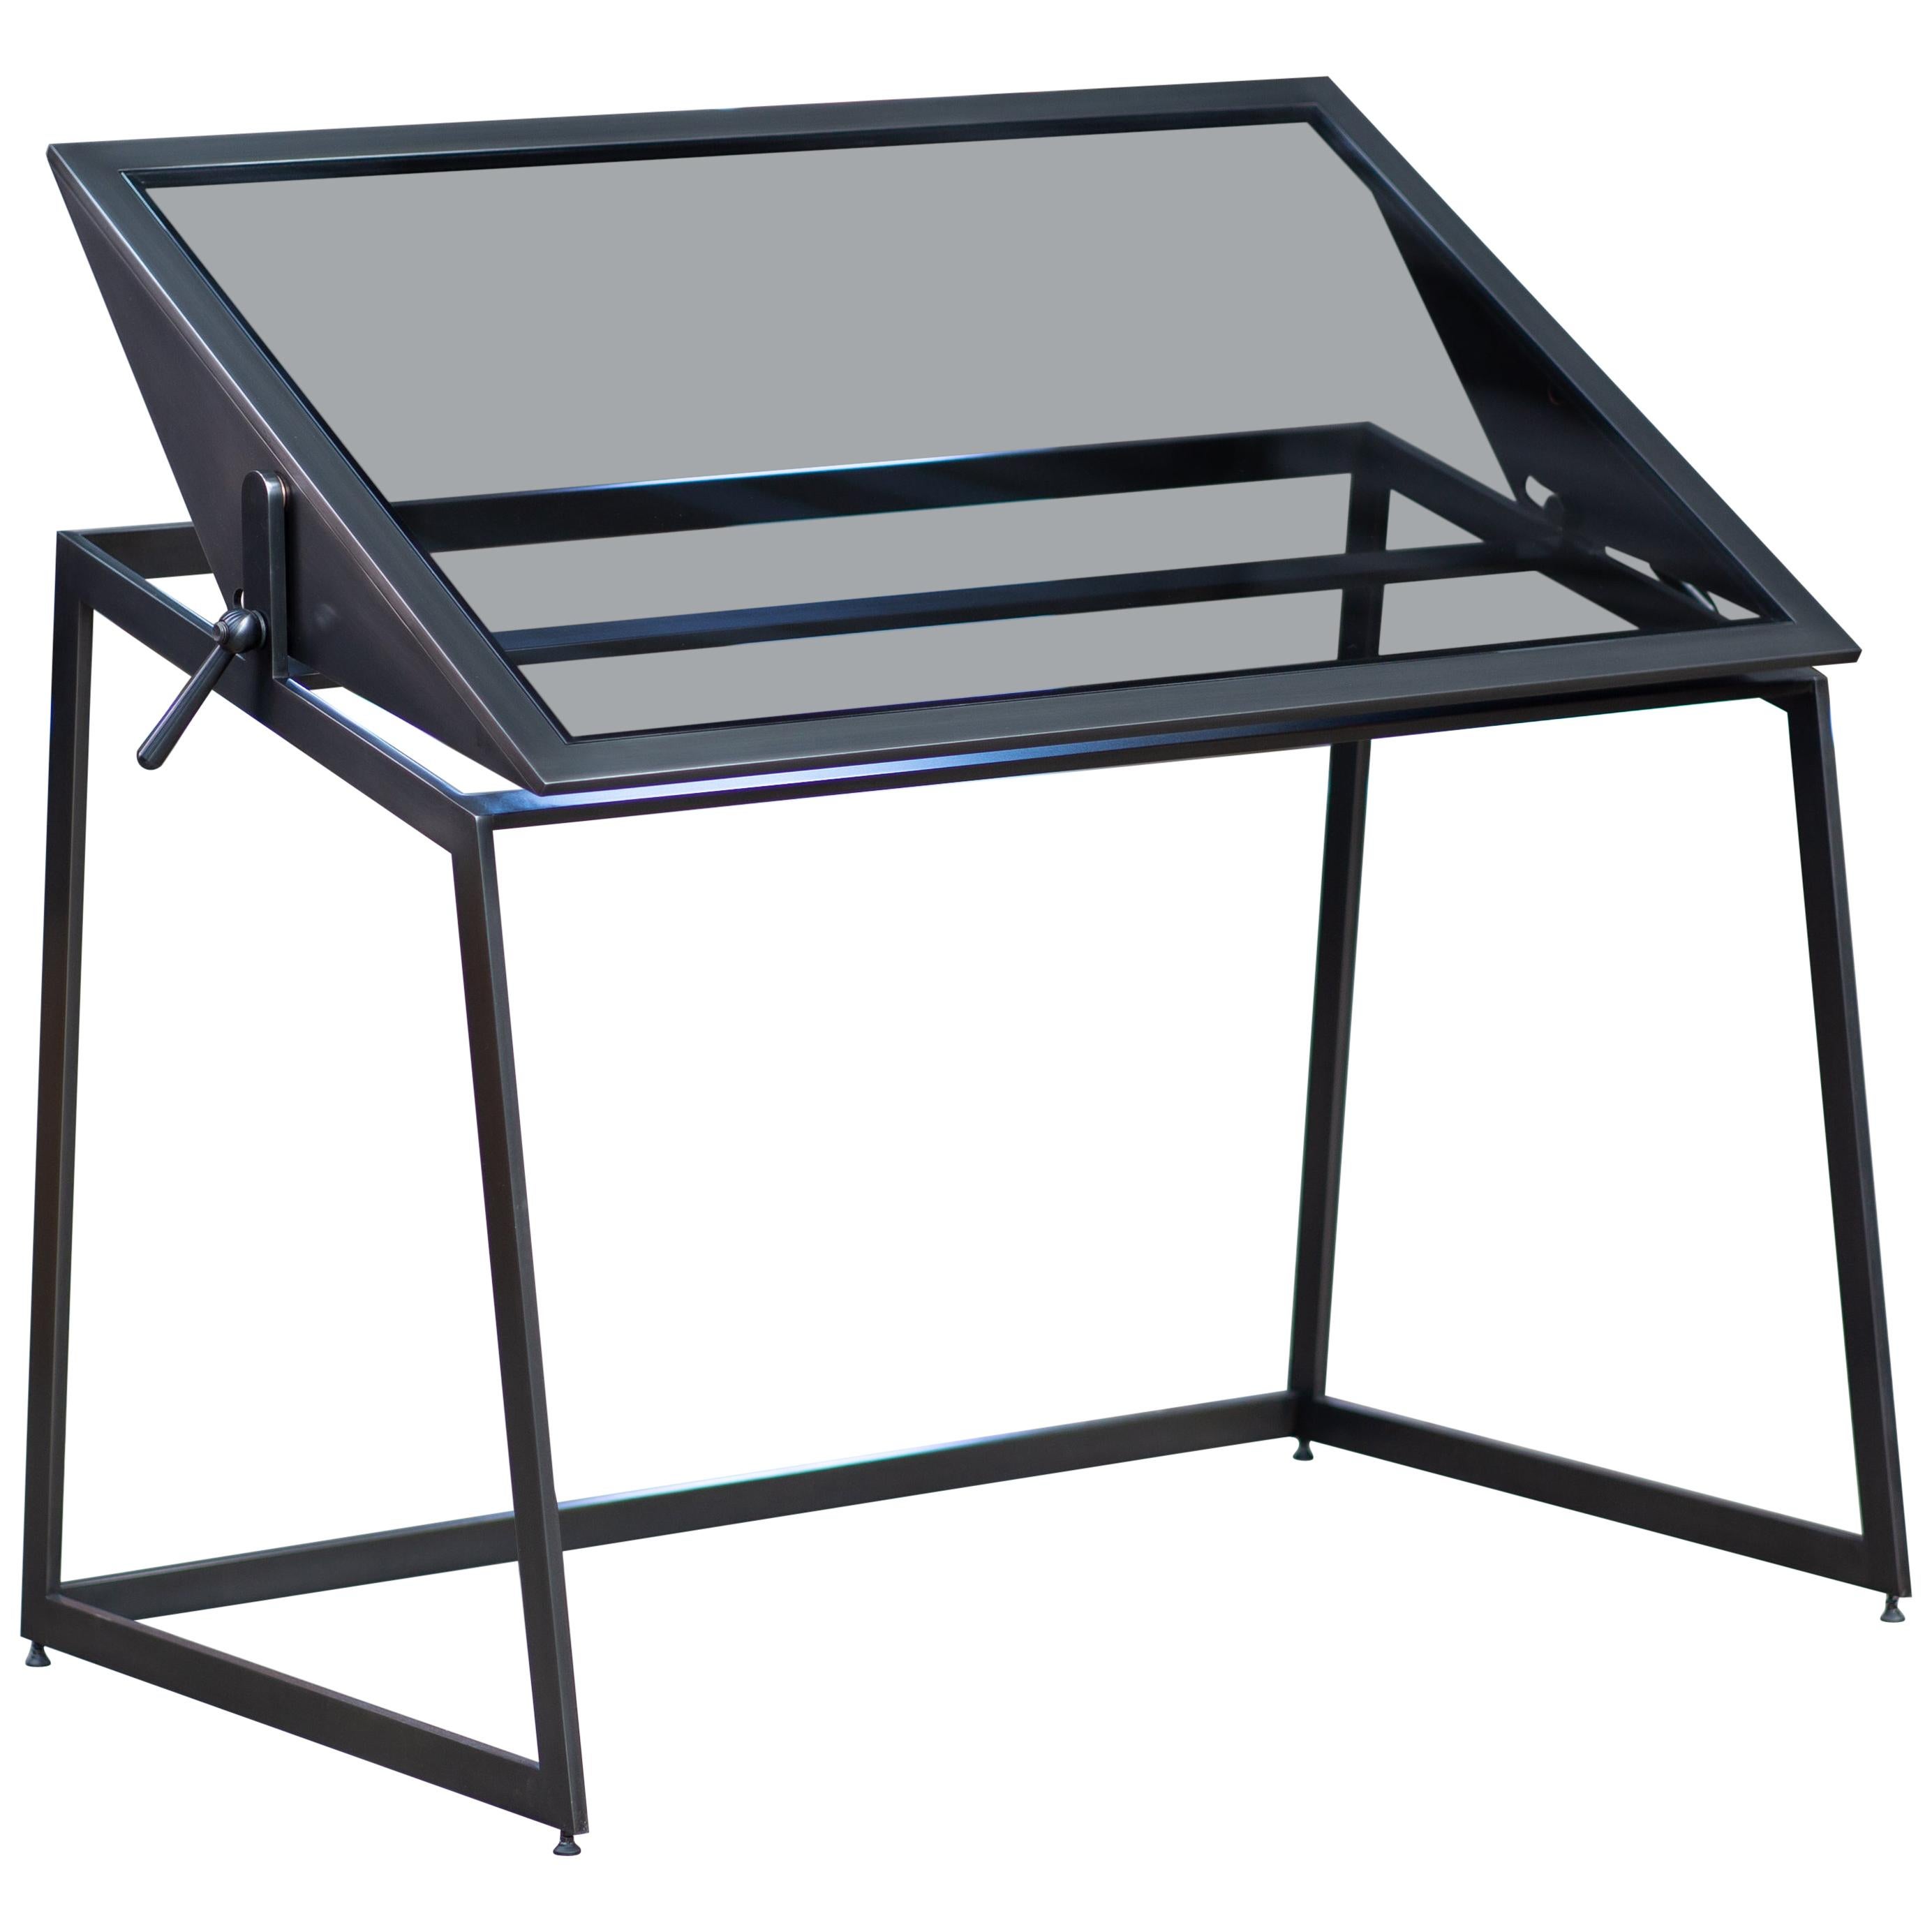 Pivoting Drafting Table, Blackened Steel and Smoked Glass, by Force/Collide